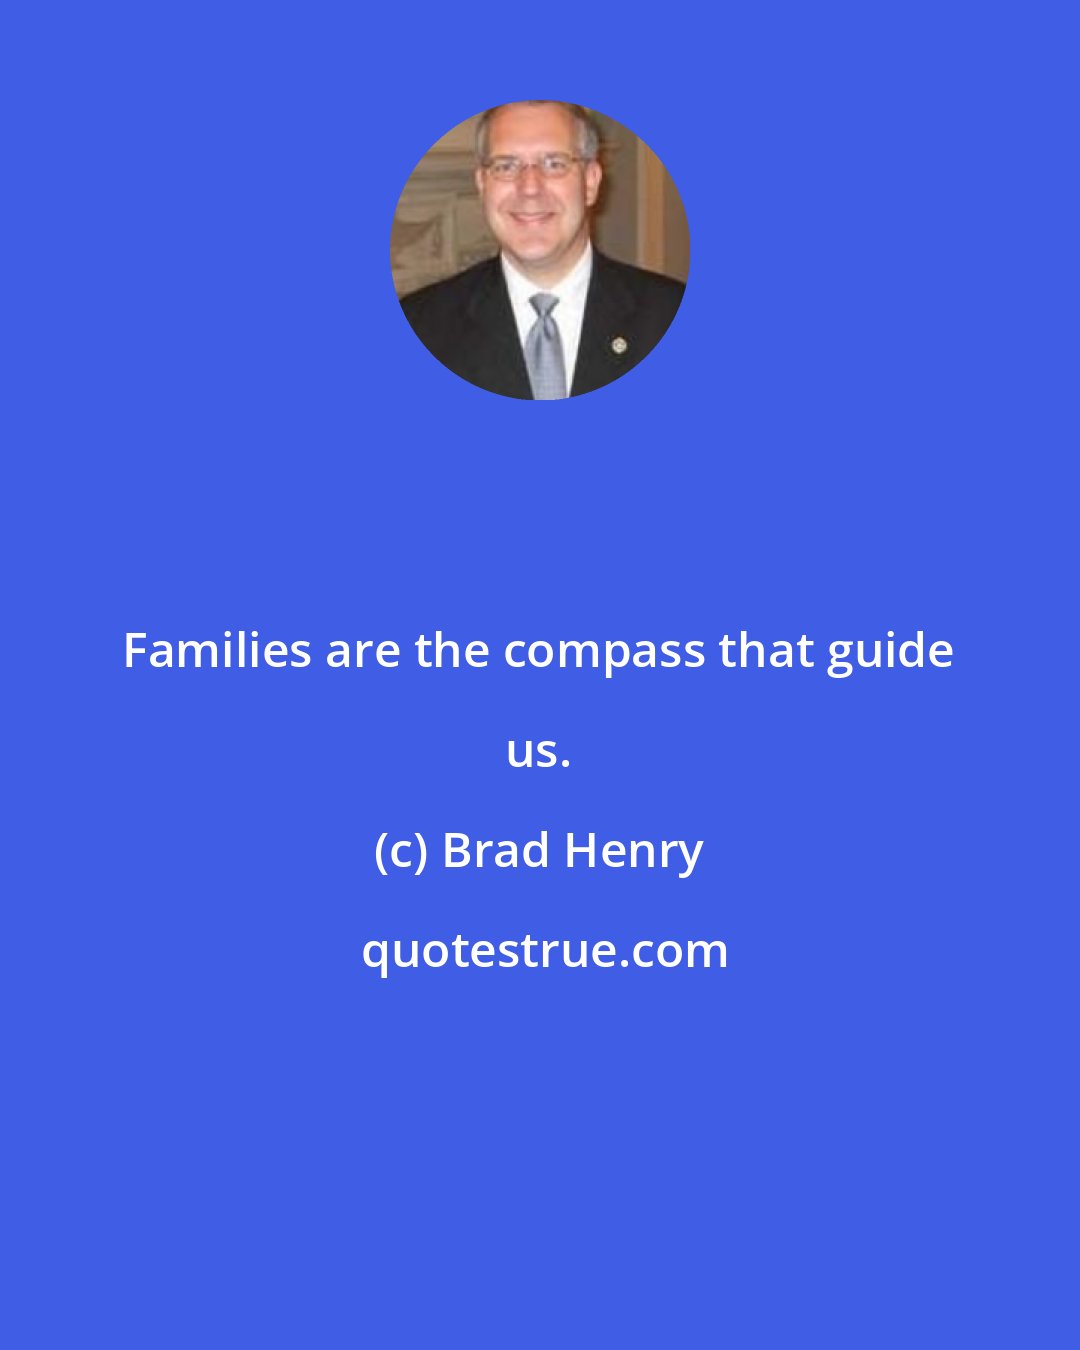 Brad Henry: Families are the compass that guide us.